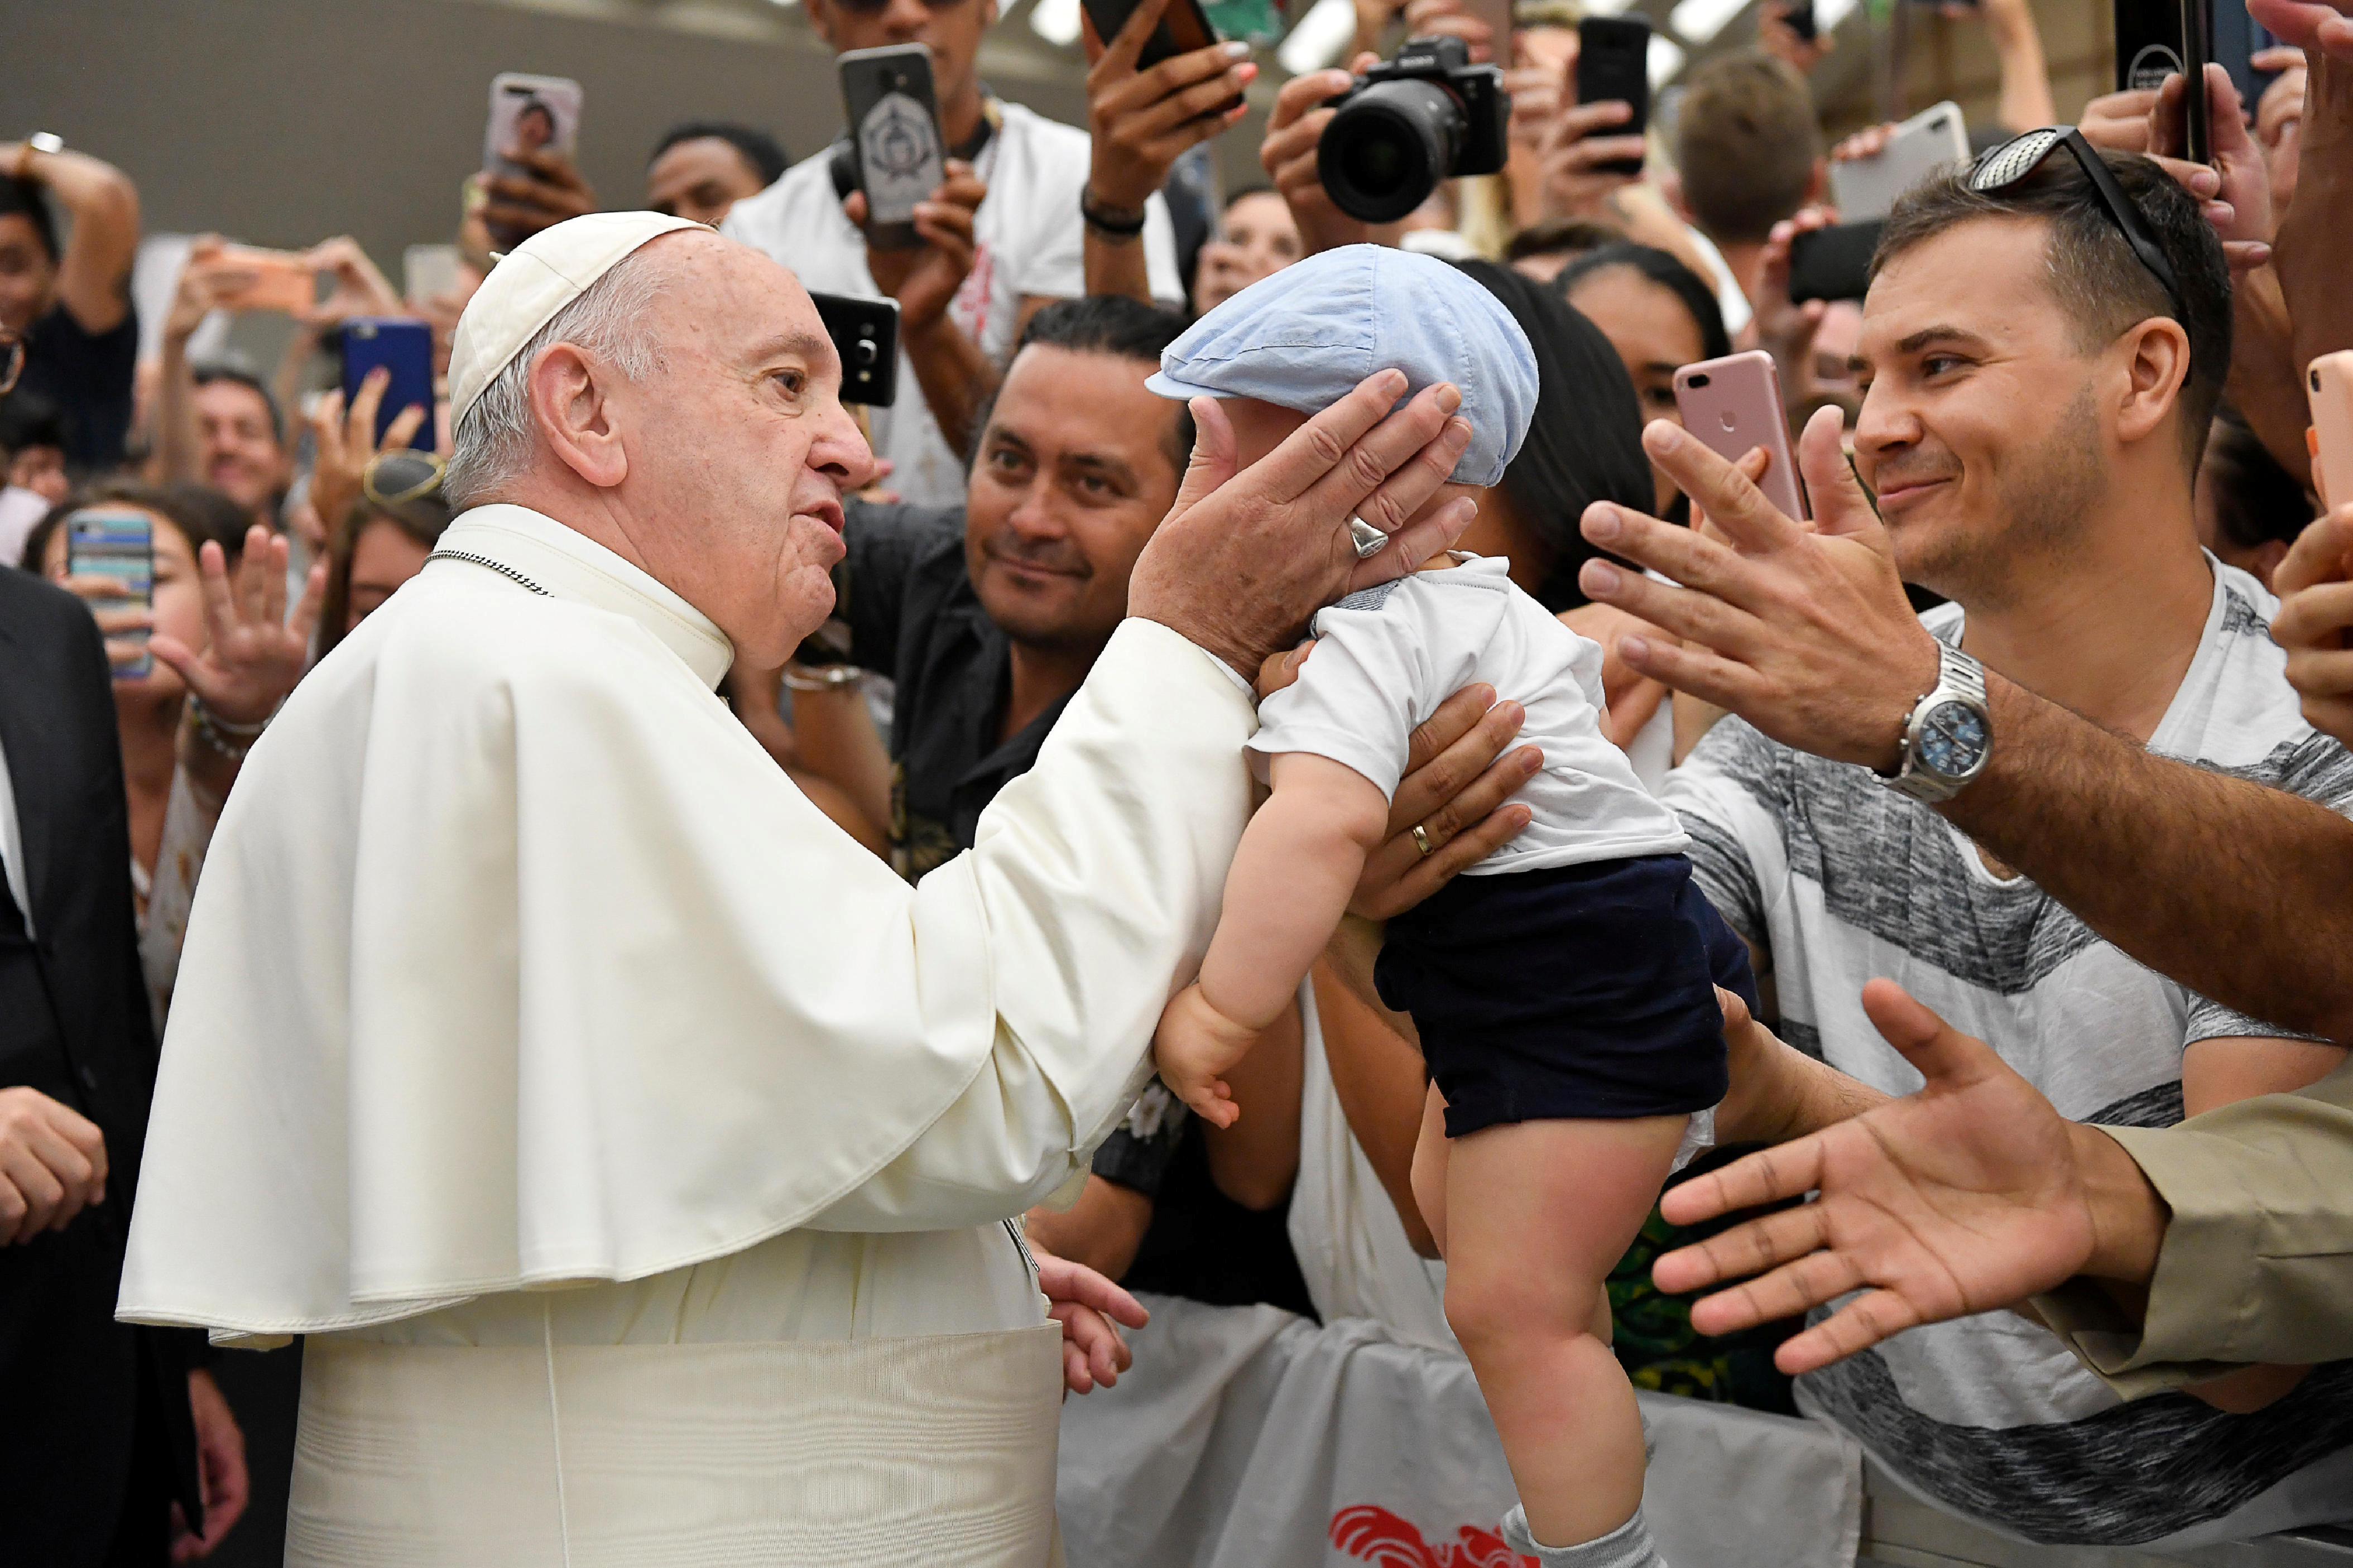 Closeness is God's answer to suffering, pope says